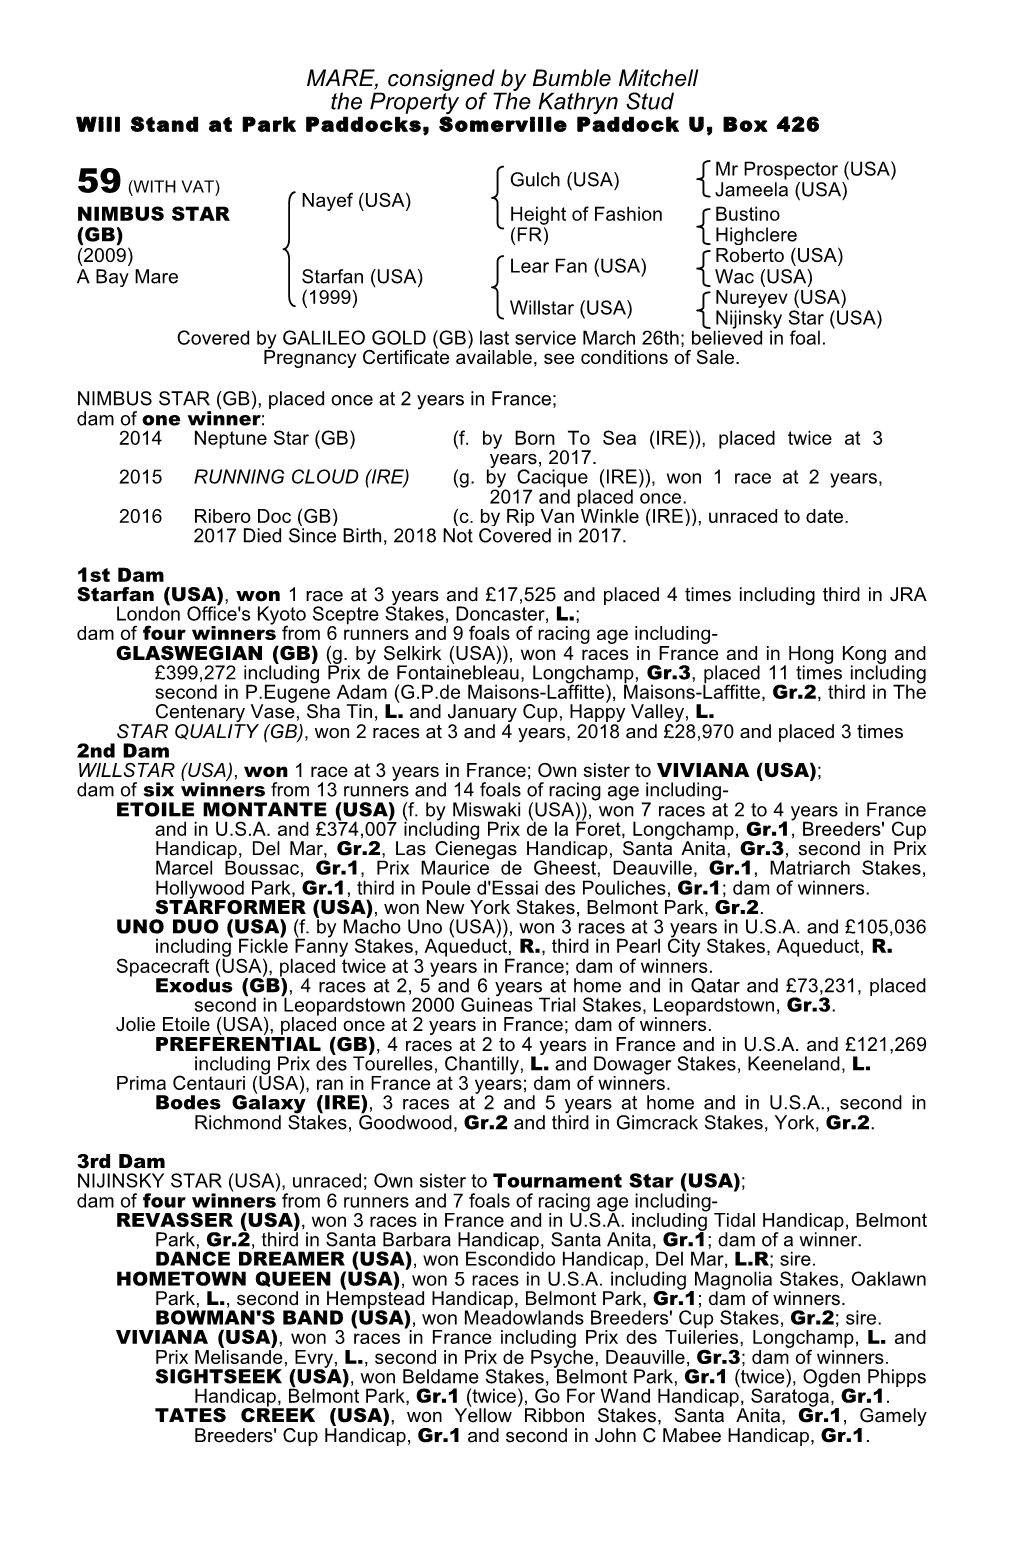 MARE, Consigned by Bumble Mitchell the Property of the Kathryn Stud Will Stand at Park Paddocks, Somerville Paddock U, Box 426